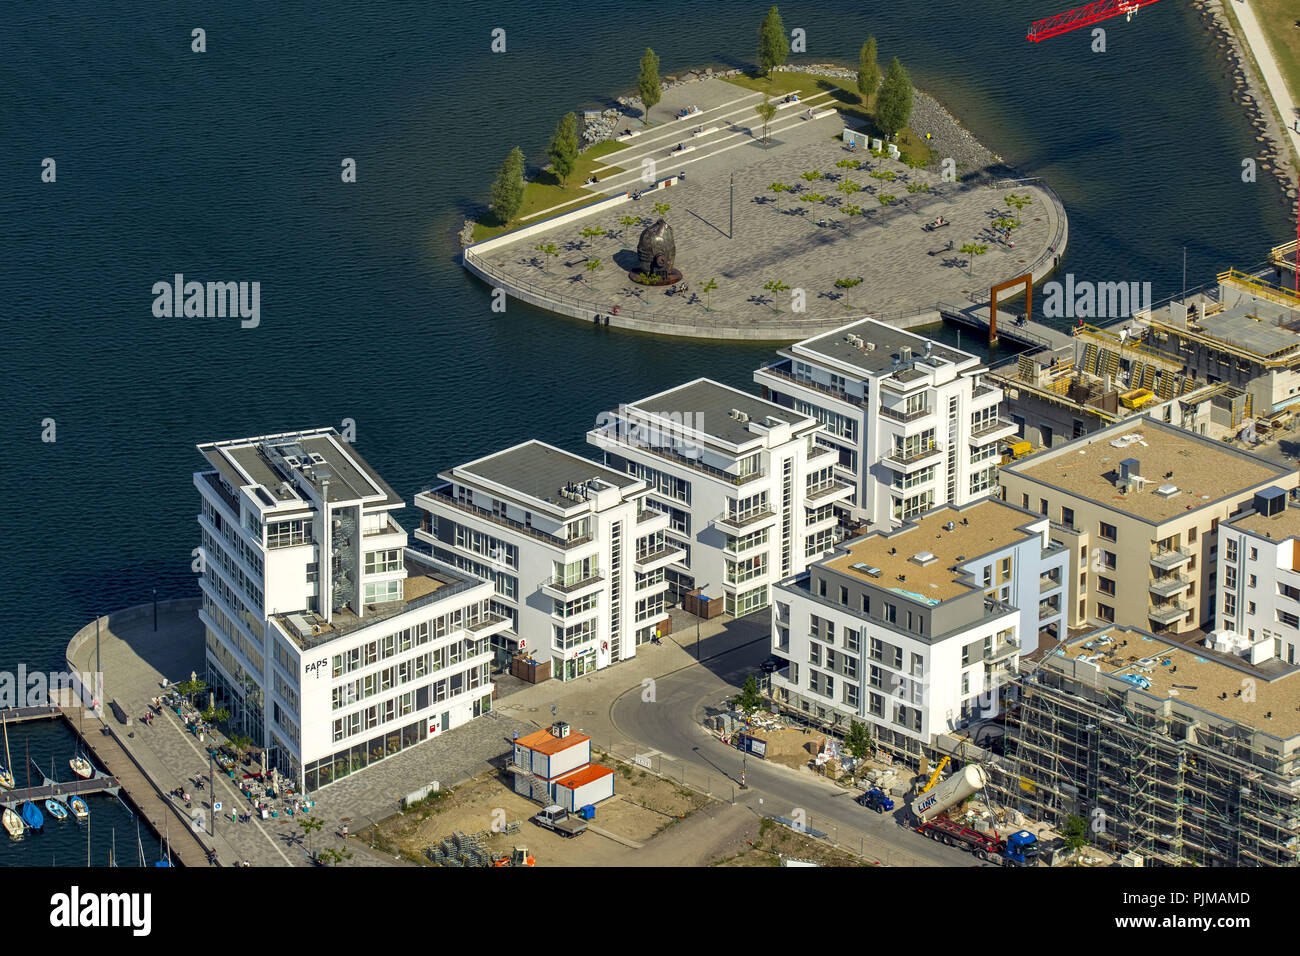 Phönixsee Dortmund, Emscher, Emscher reconstruction, former steelworks in Dortmund-Hörde, new residential area, structural change, office buildings as a mixed use for commercial and housing, Dortmund, Ruhr area, North Rhine-Westphalia, Germany Stock Photo